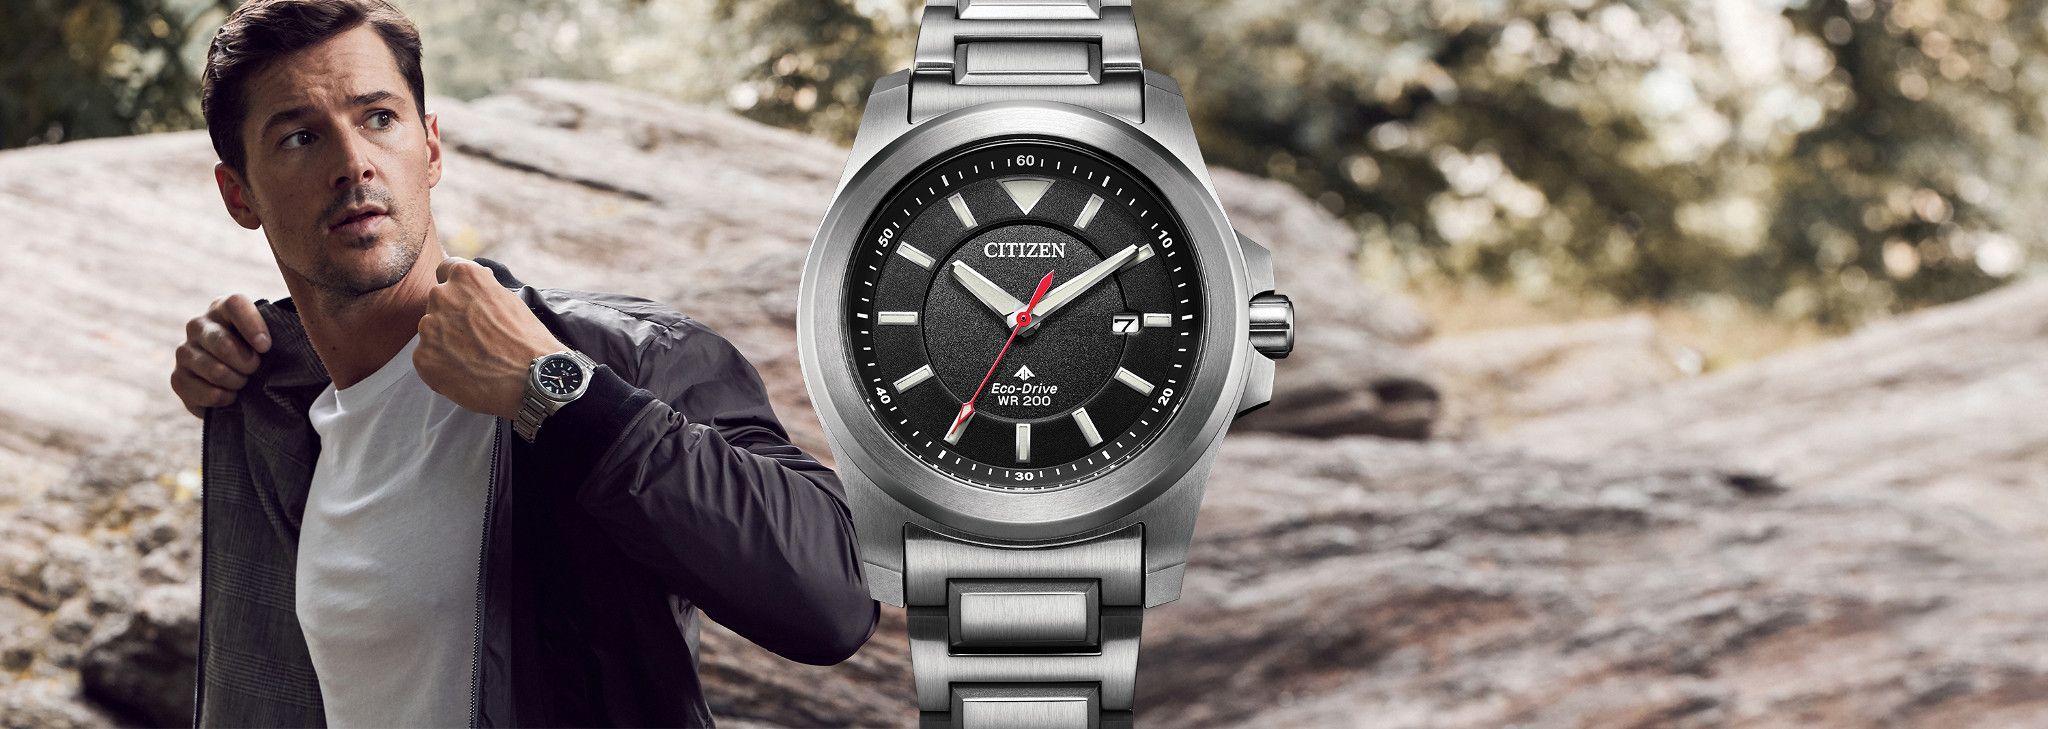 Military Style Watches For Men | Citizen